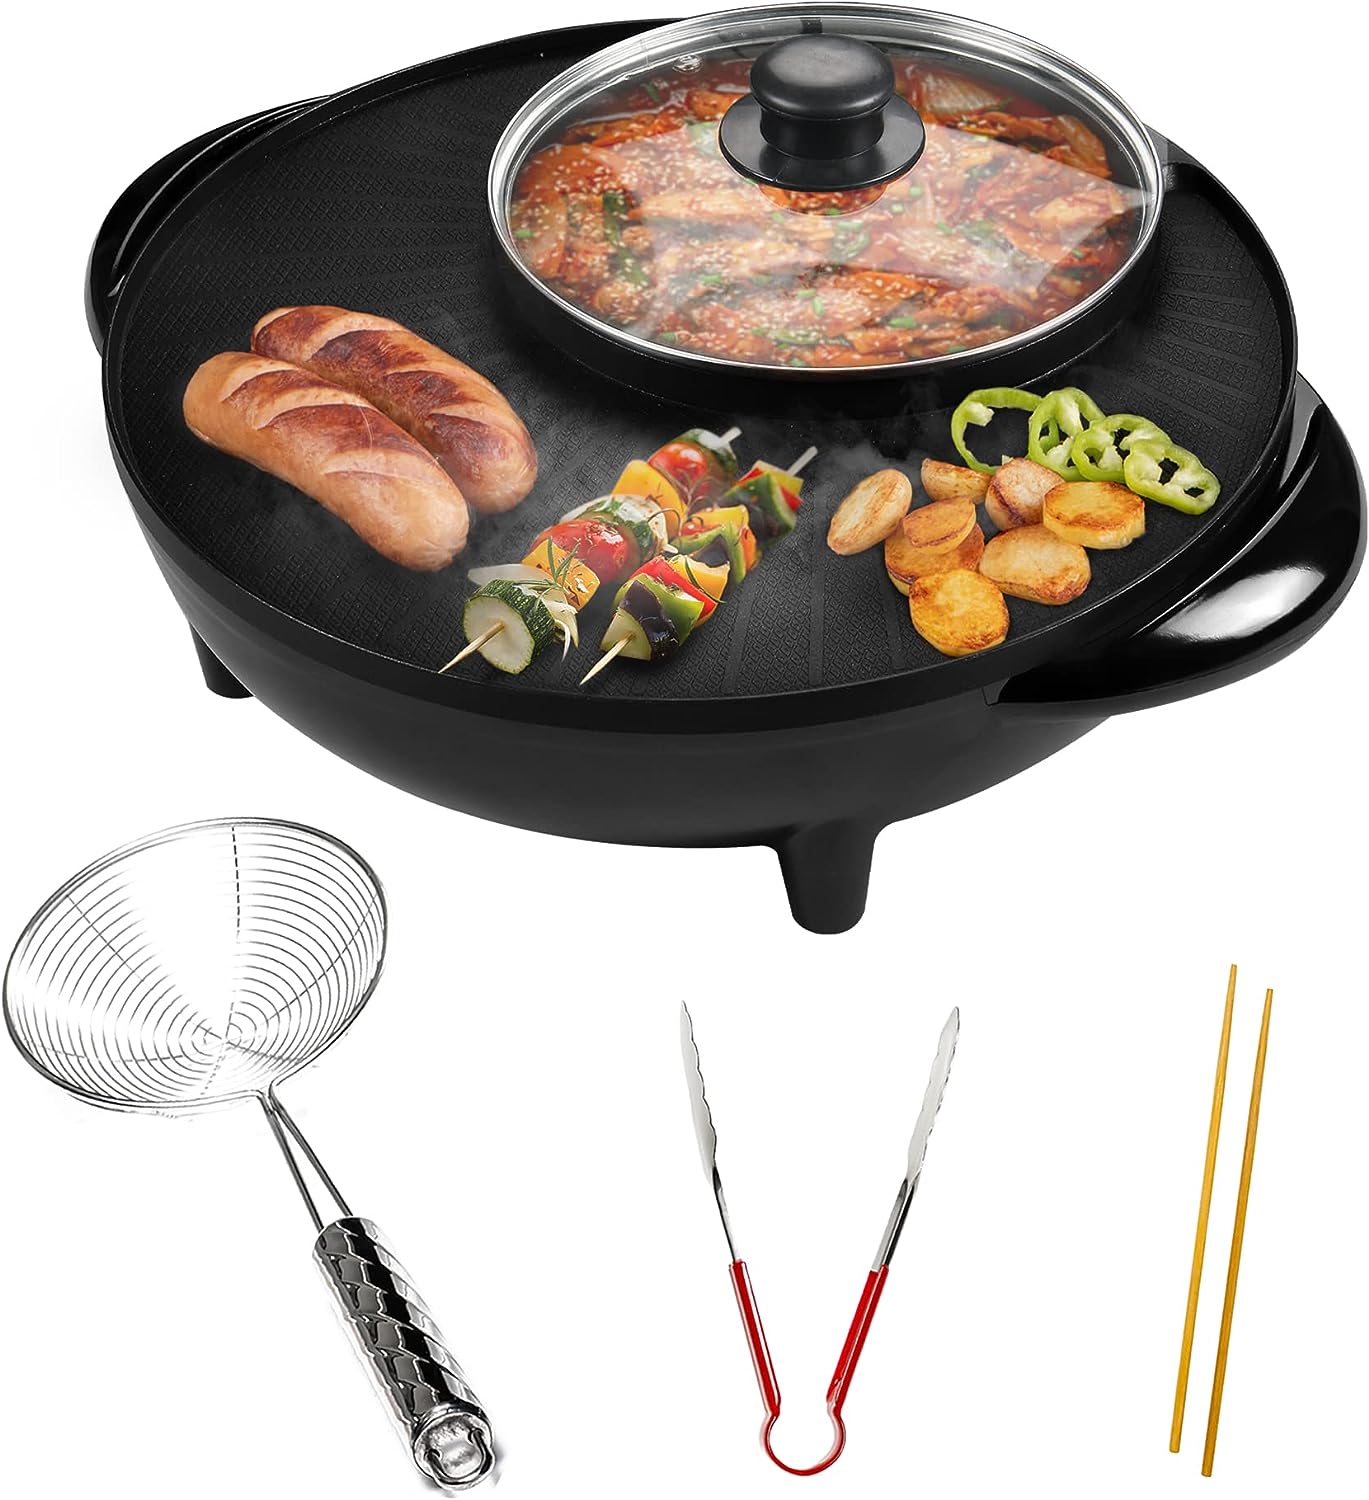 Hot Pot with Grill, 2 in 1 Multi-function Nonstick Hotpot Pot Electric  Grill Indoor Shabu Shabu Pot Korean BBQ Grill Smokeless, Separate Dual